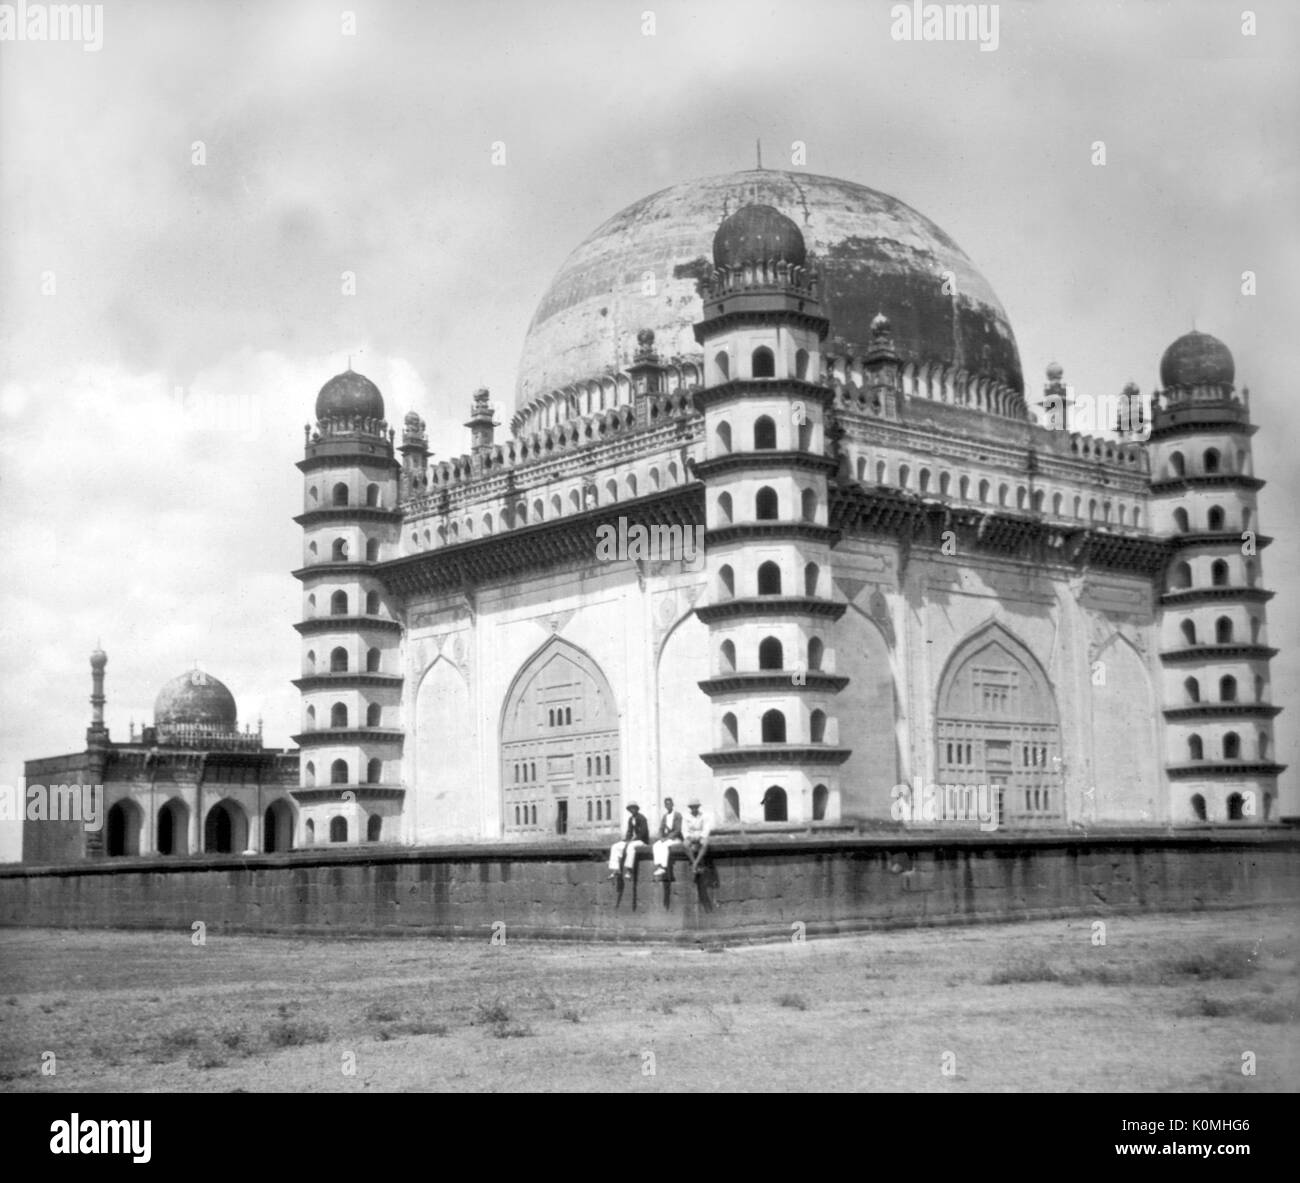 Gol Gumbaz Tomb High Resolution Stock Photography and Images - Alamy